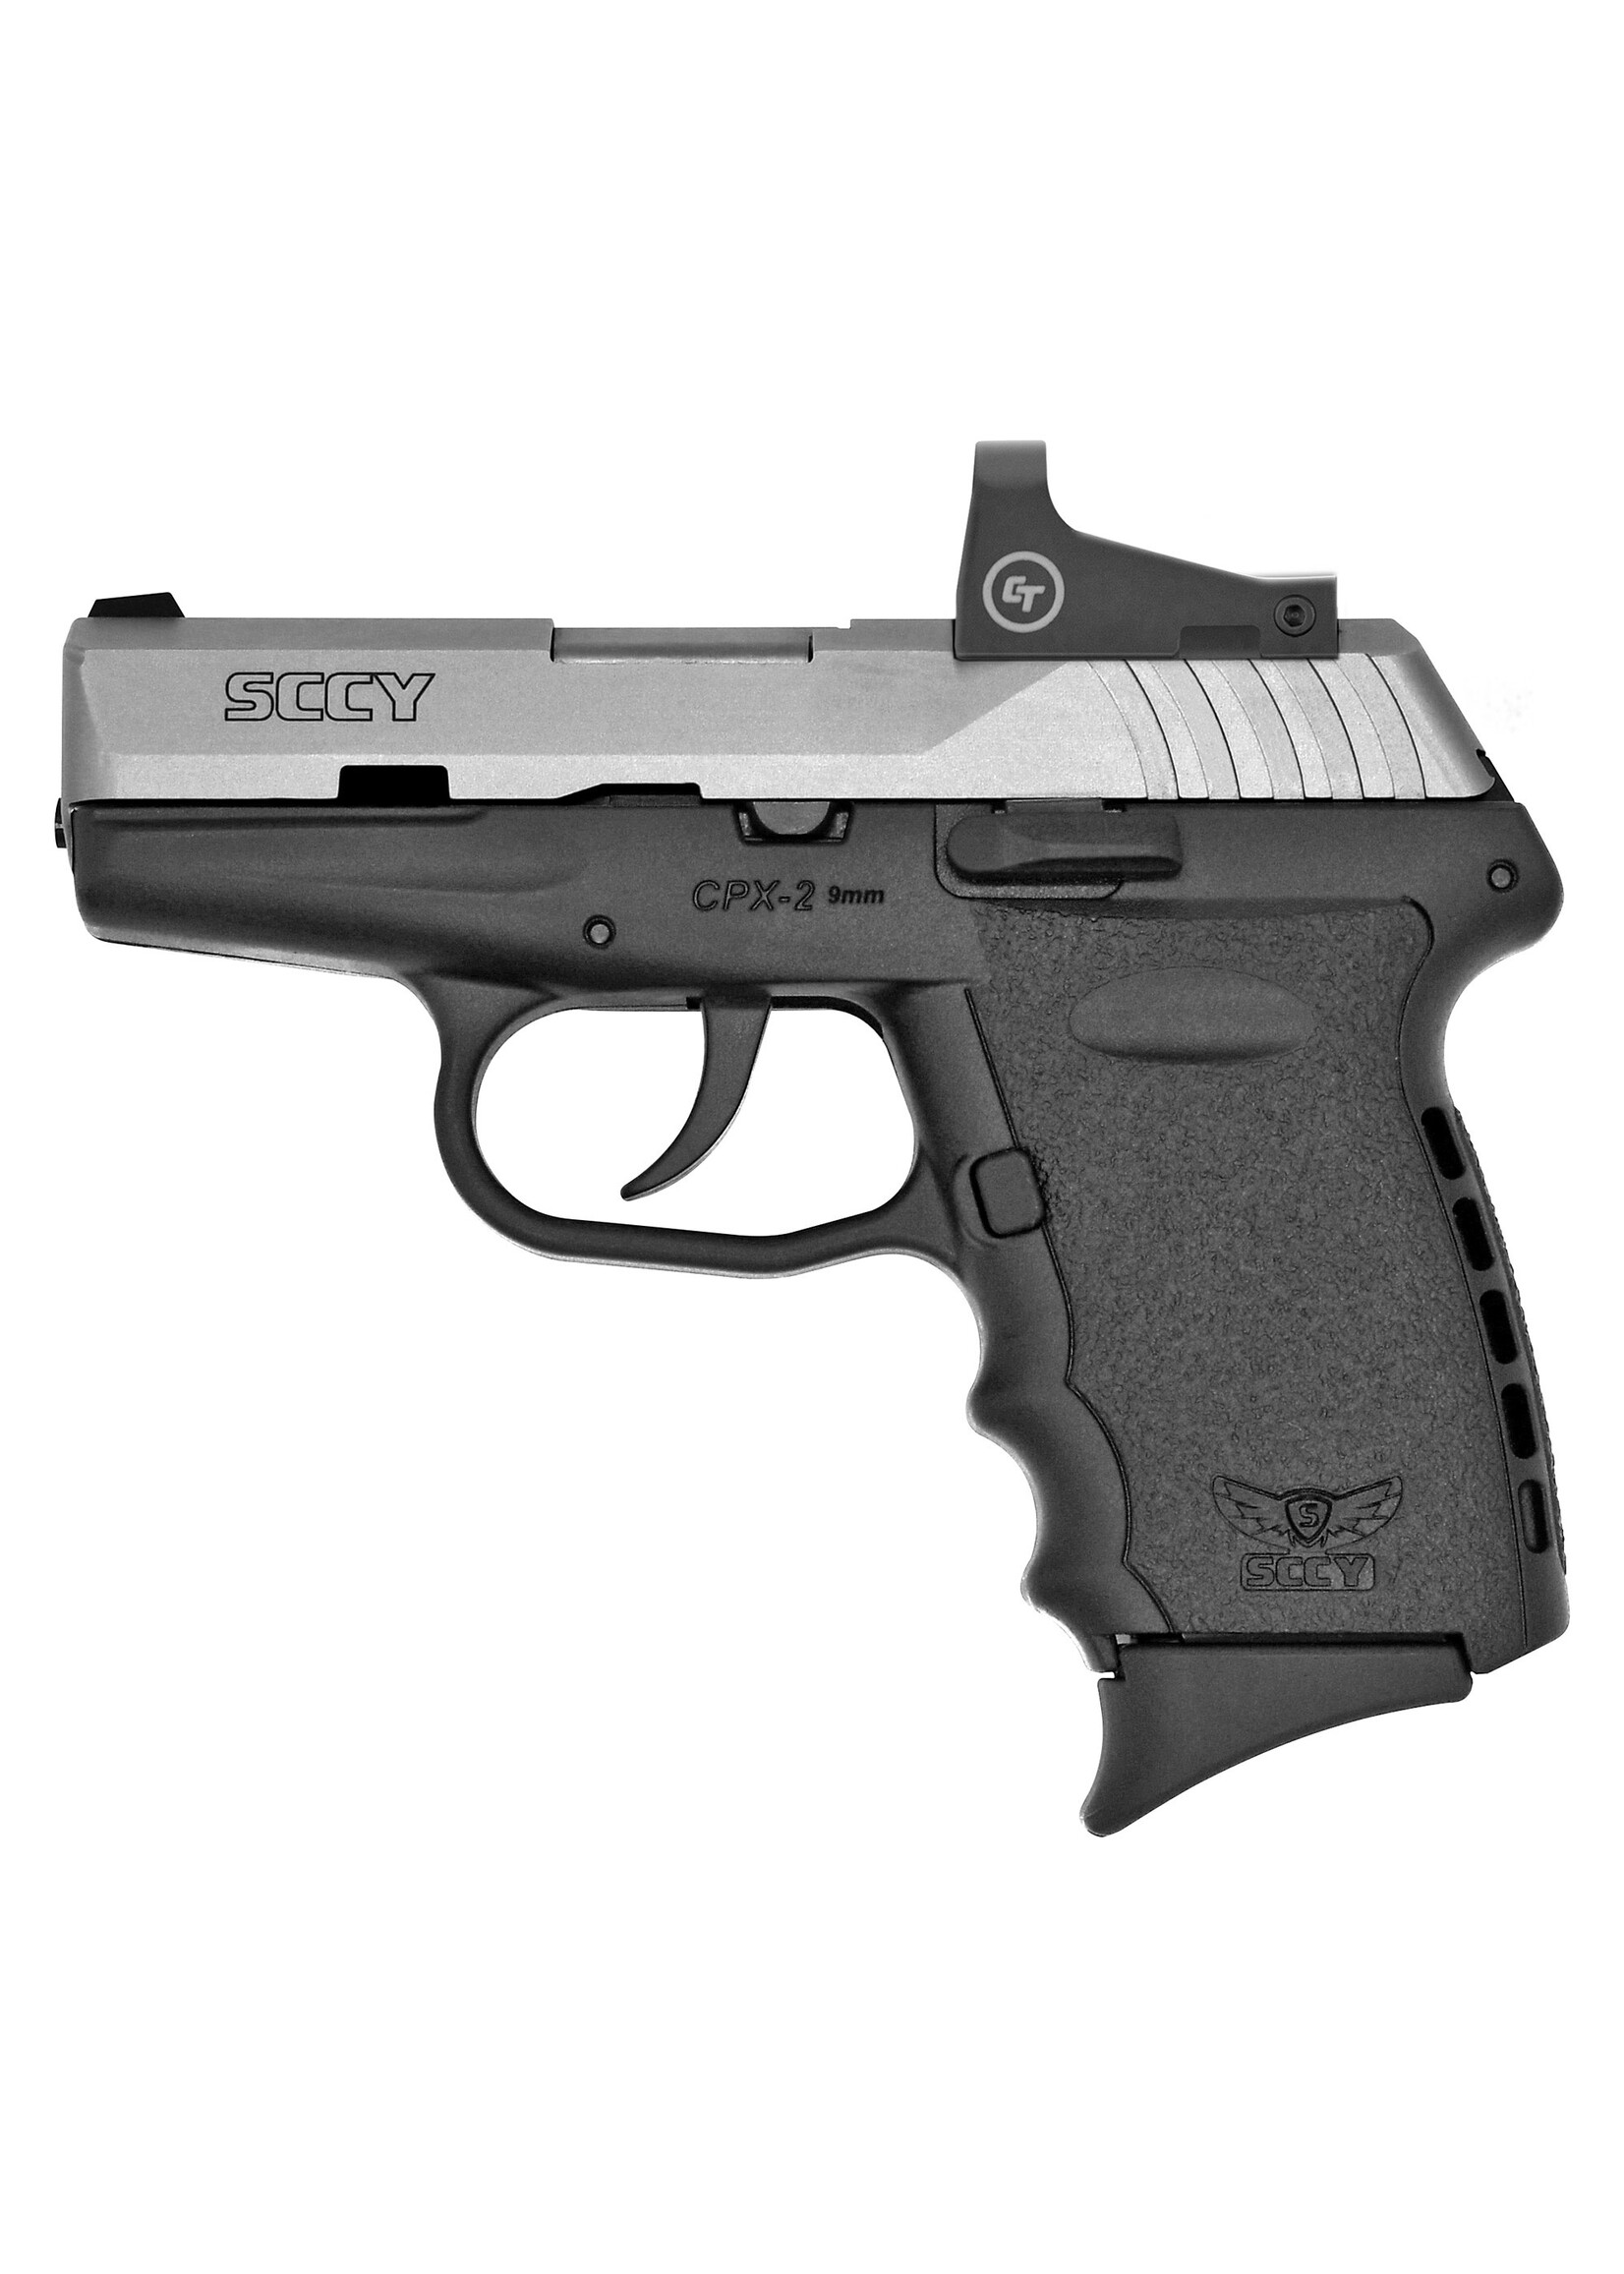 Sccy Industries SCCY, CPX-2, Double Action Only, Semi-automatic, Polymer Frame Pistol, Compact, 9MM, 3.1" Barrel, Satin Slide, Black Frame, 10 Rounds, Crimson Trace Red Dot Sight, 2 Magazines